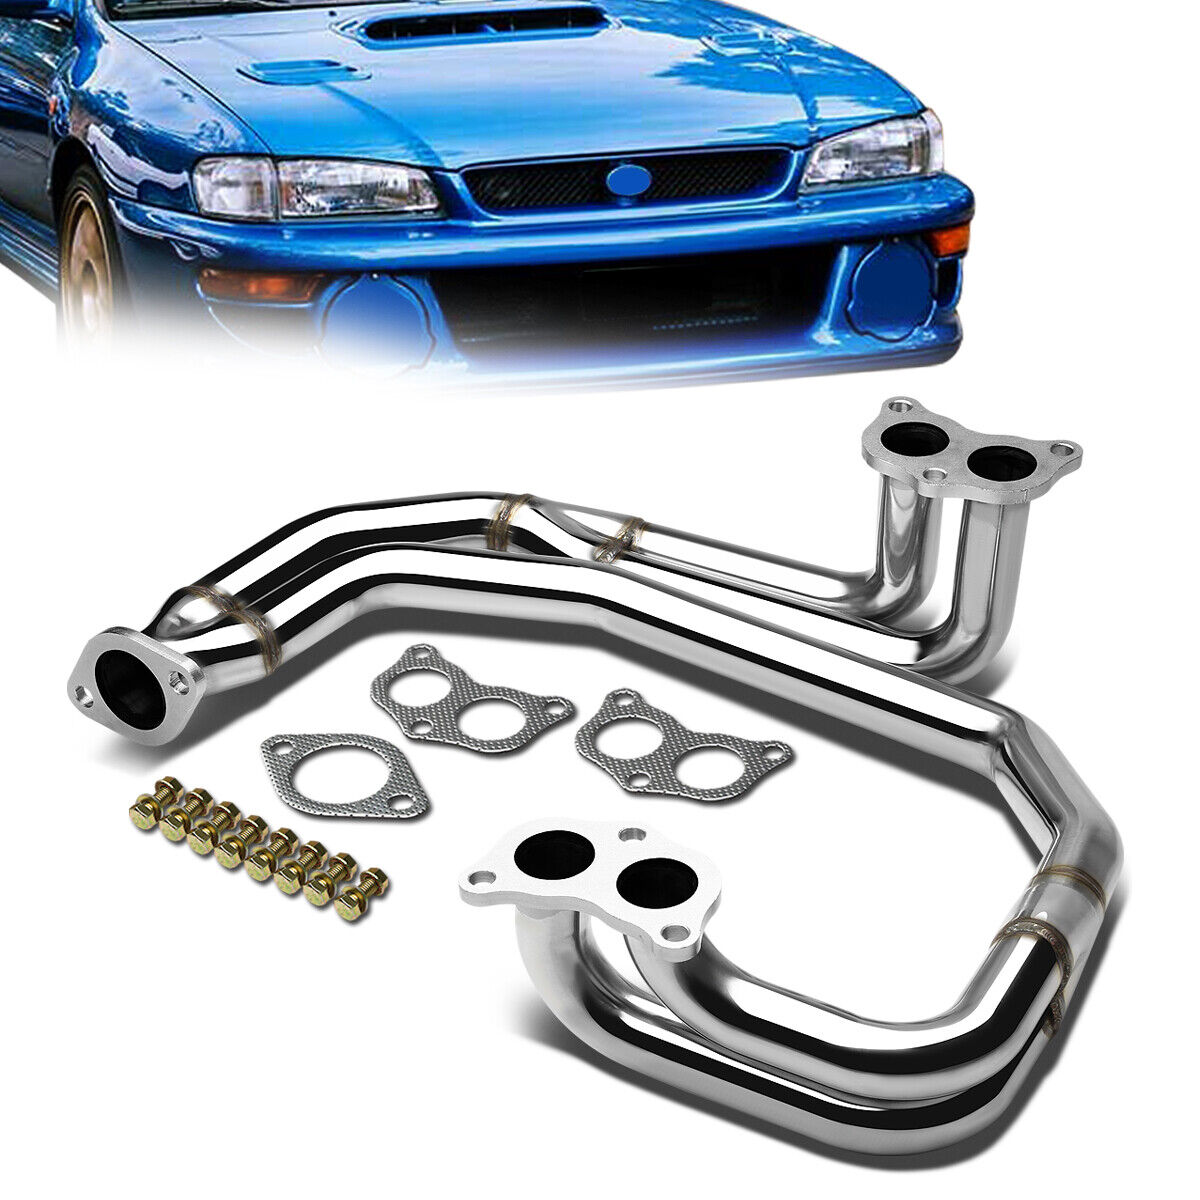 FOR 98-05 SUBARU IMPREZA WRX 2.5RS 2.5L RS NON TURBO STAINLESS EXHAUST HEADER